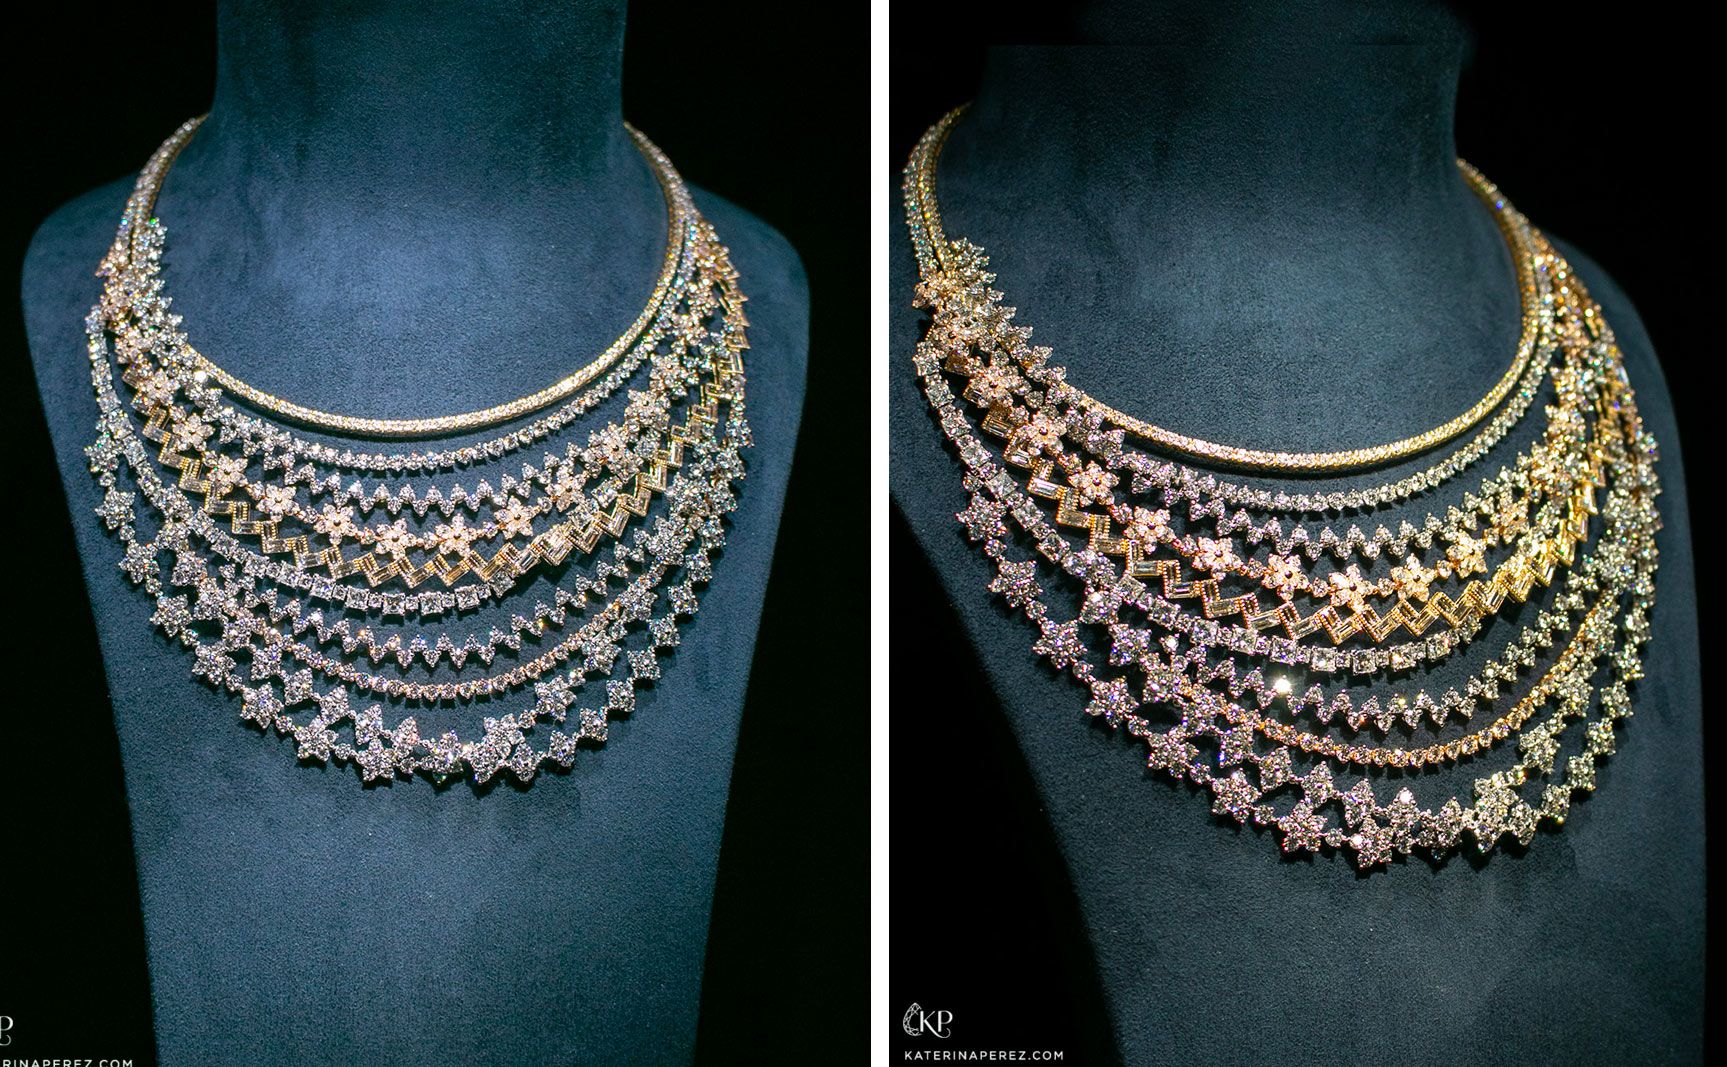 Layered diamond necklaces from the Dior Joaillerie Galons Dior High Jewellery Collection